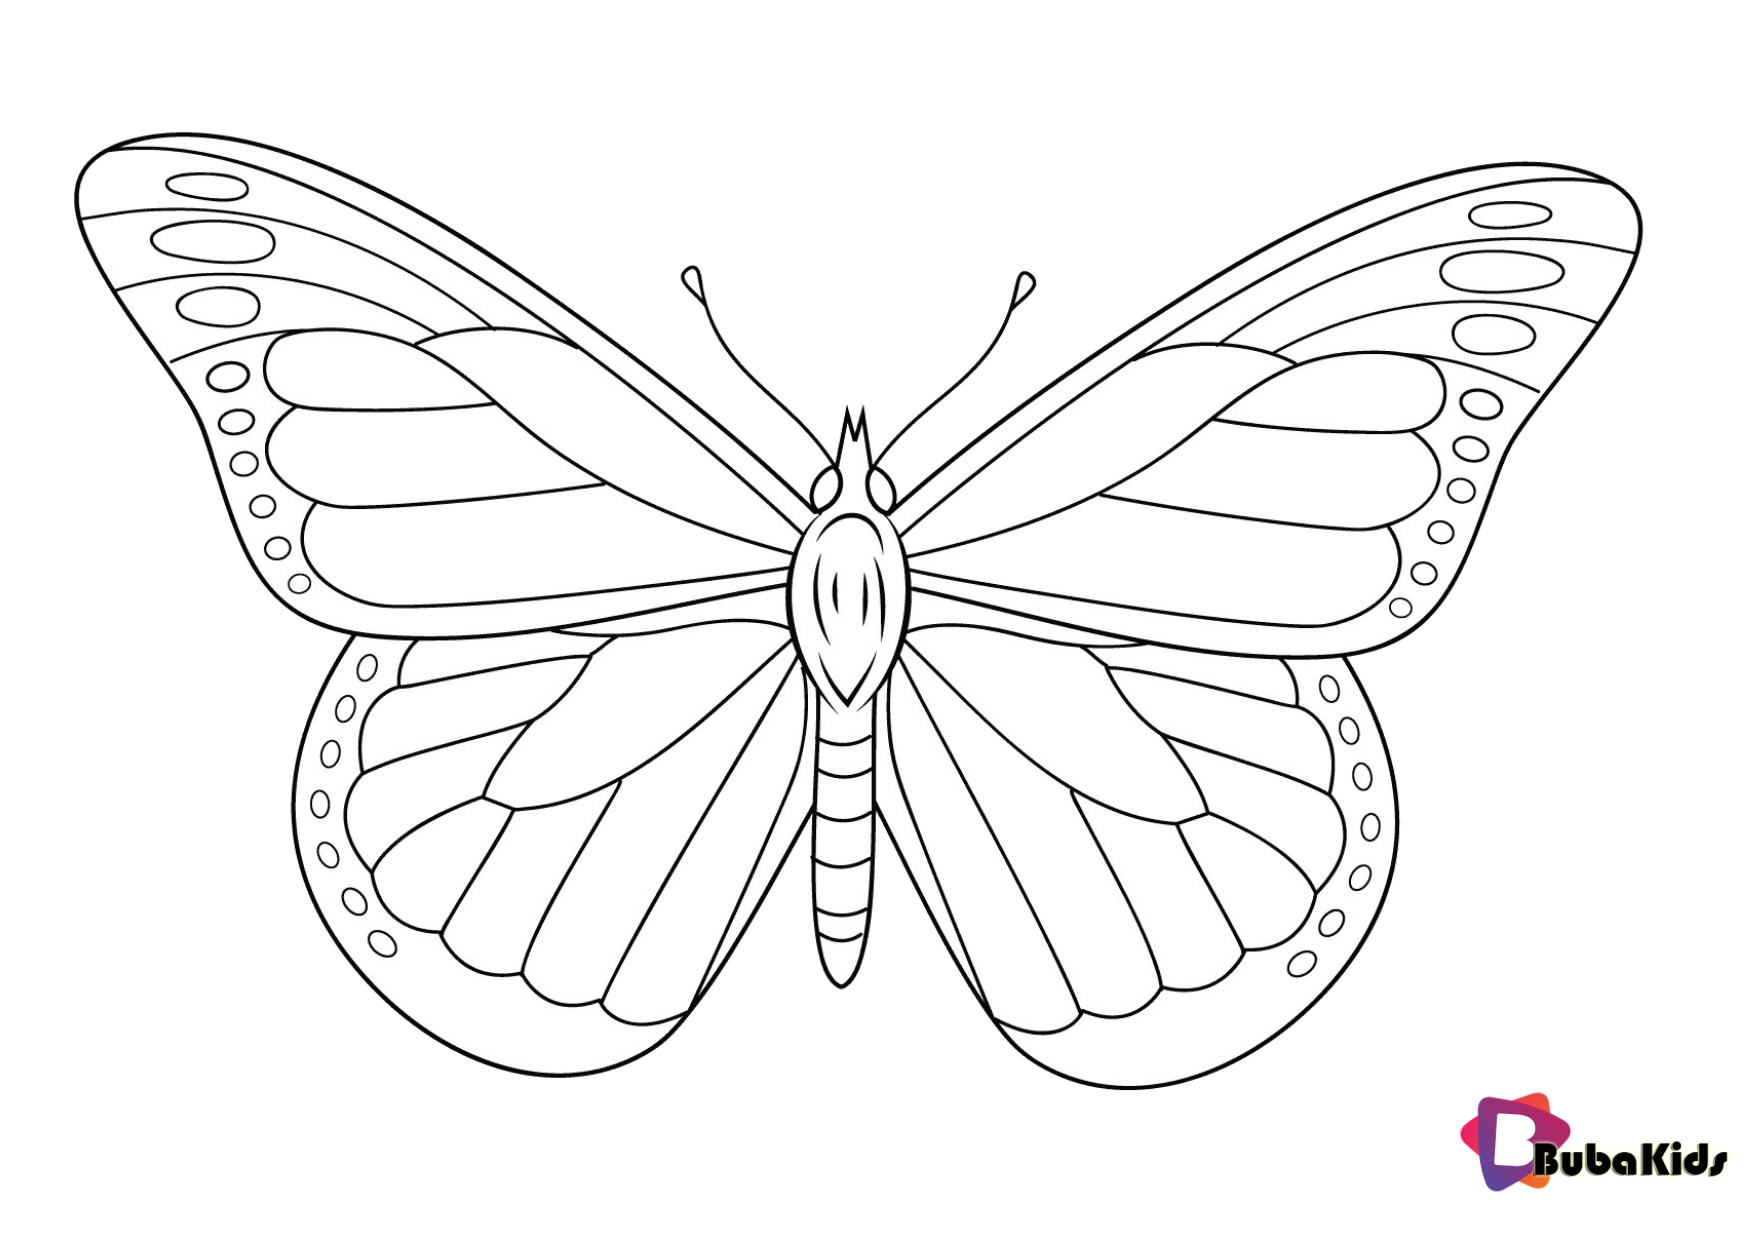 Butterfly coloring page for kids. Wallpaper